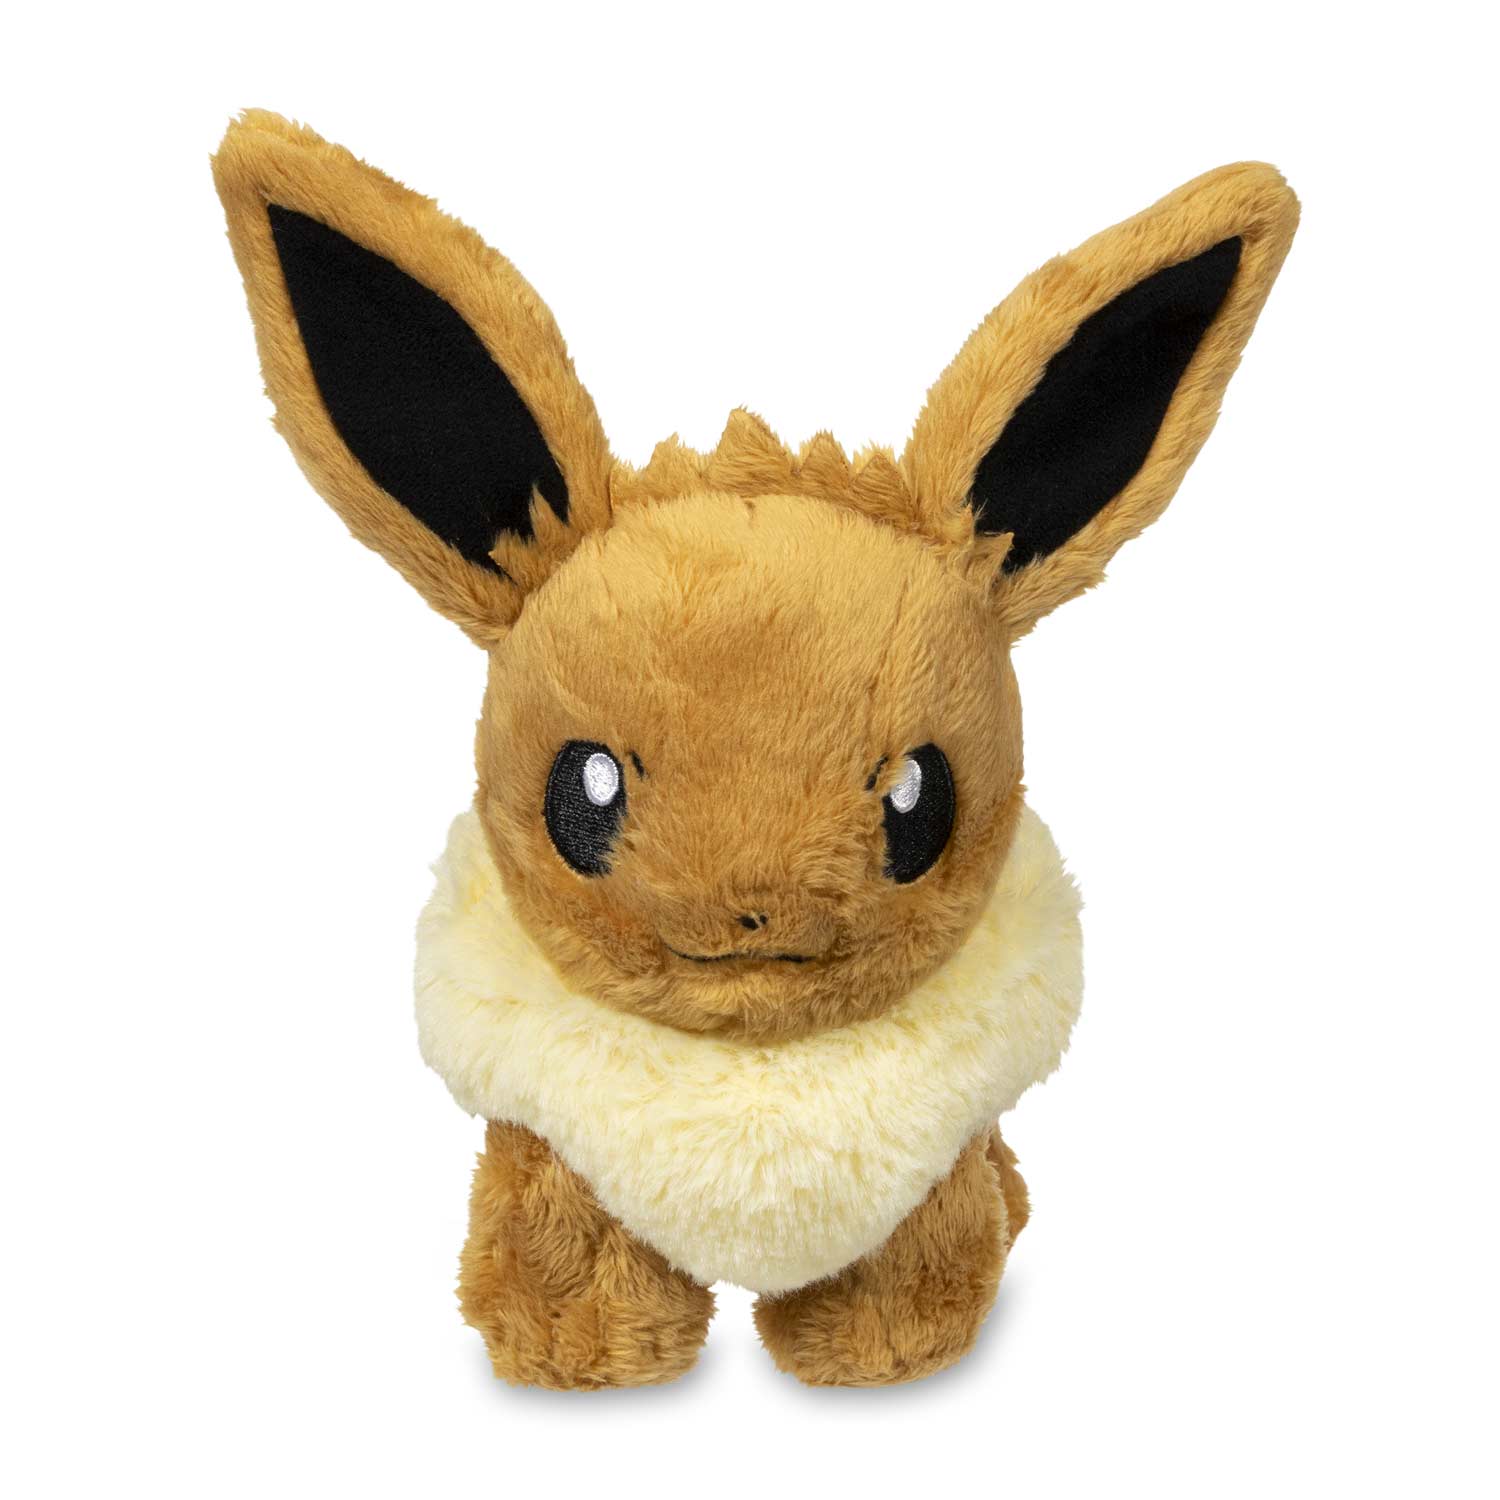 The official Sitting Eevee Fluffy Plush has soft fabric that can be brushed...